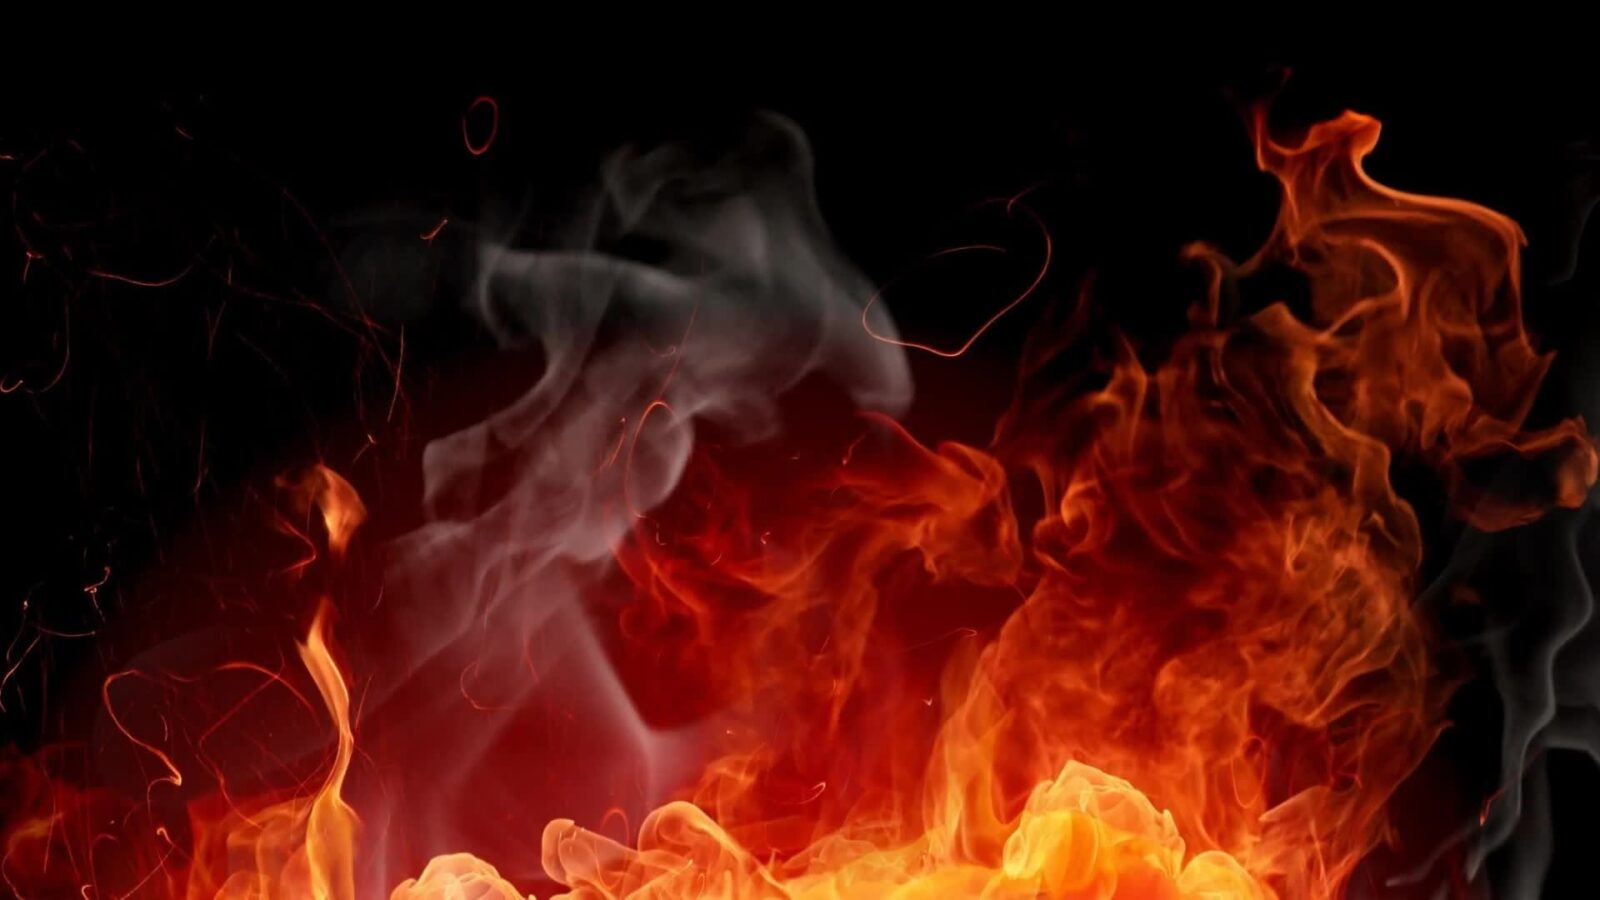 LiveWallpapers4Free.com | Fire Flame Abstract - Free Live Wallpaper